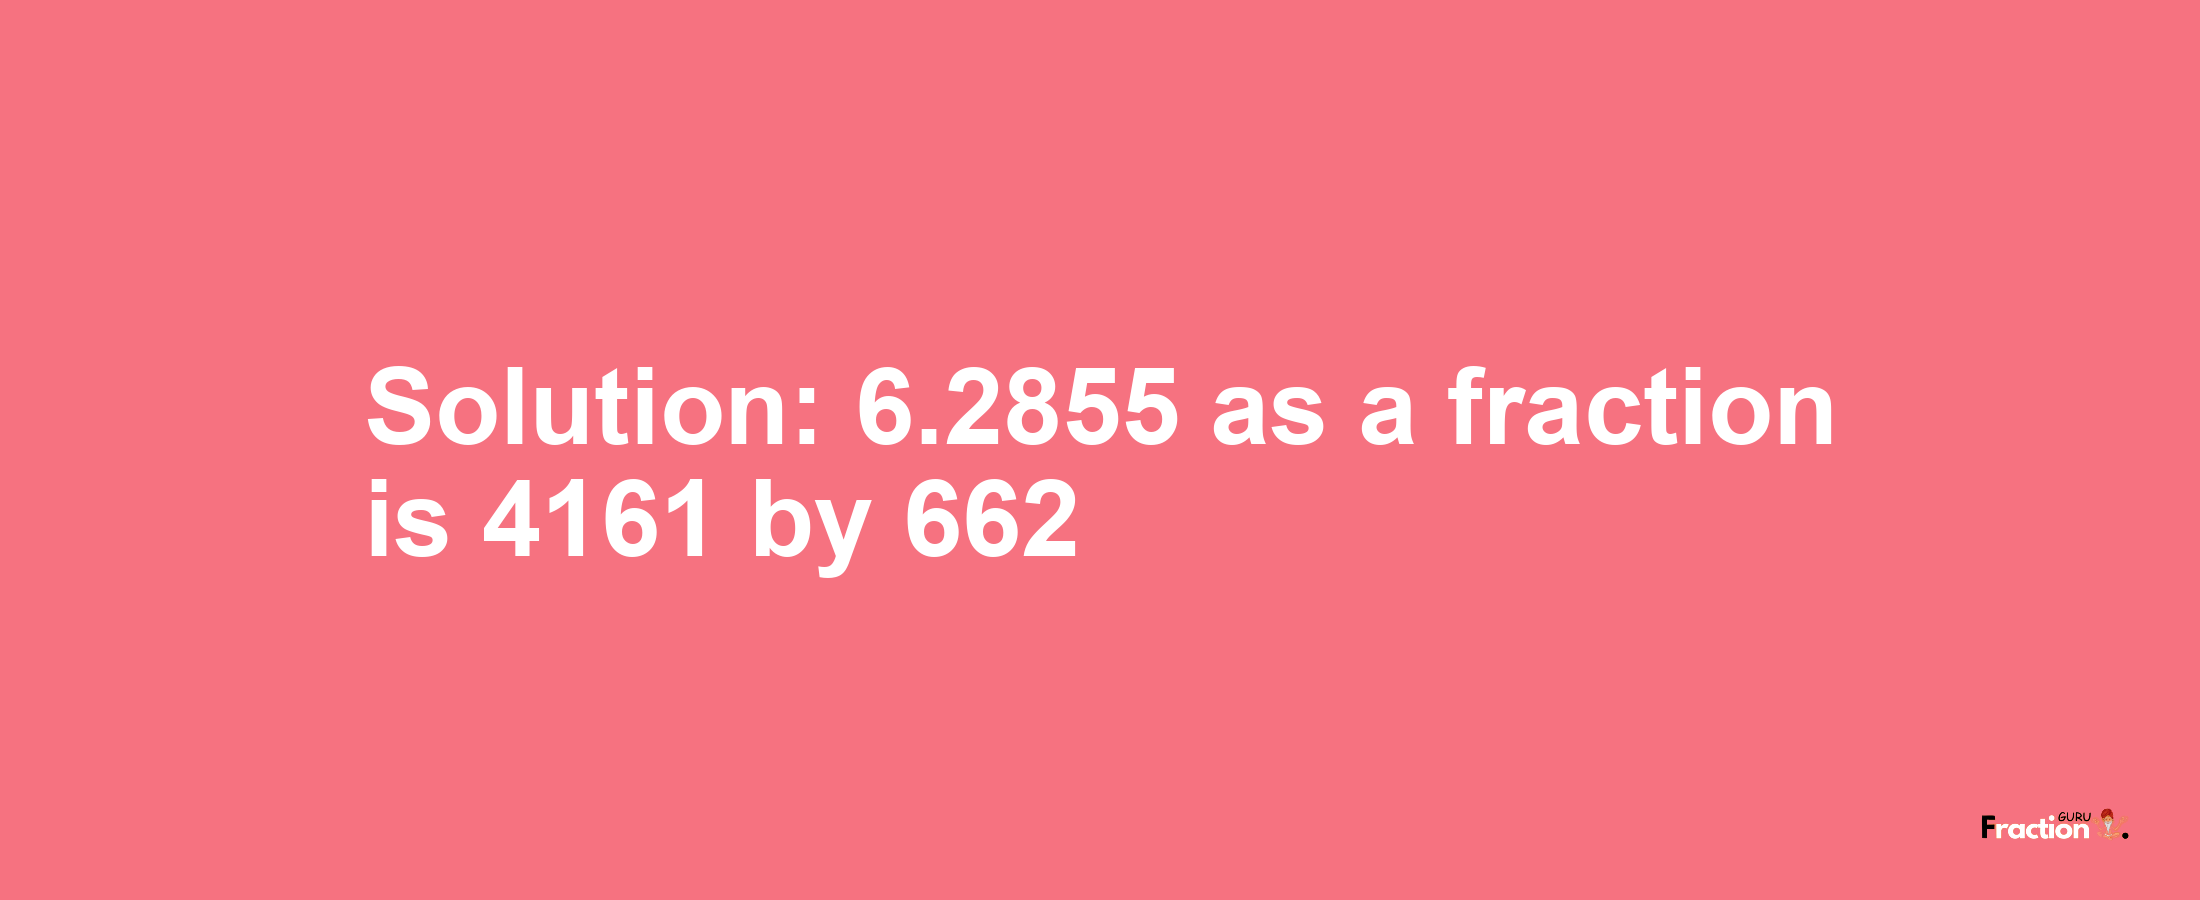 Solution:6.2855 as a fraction is 4161/662